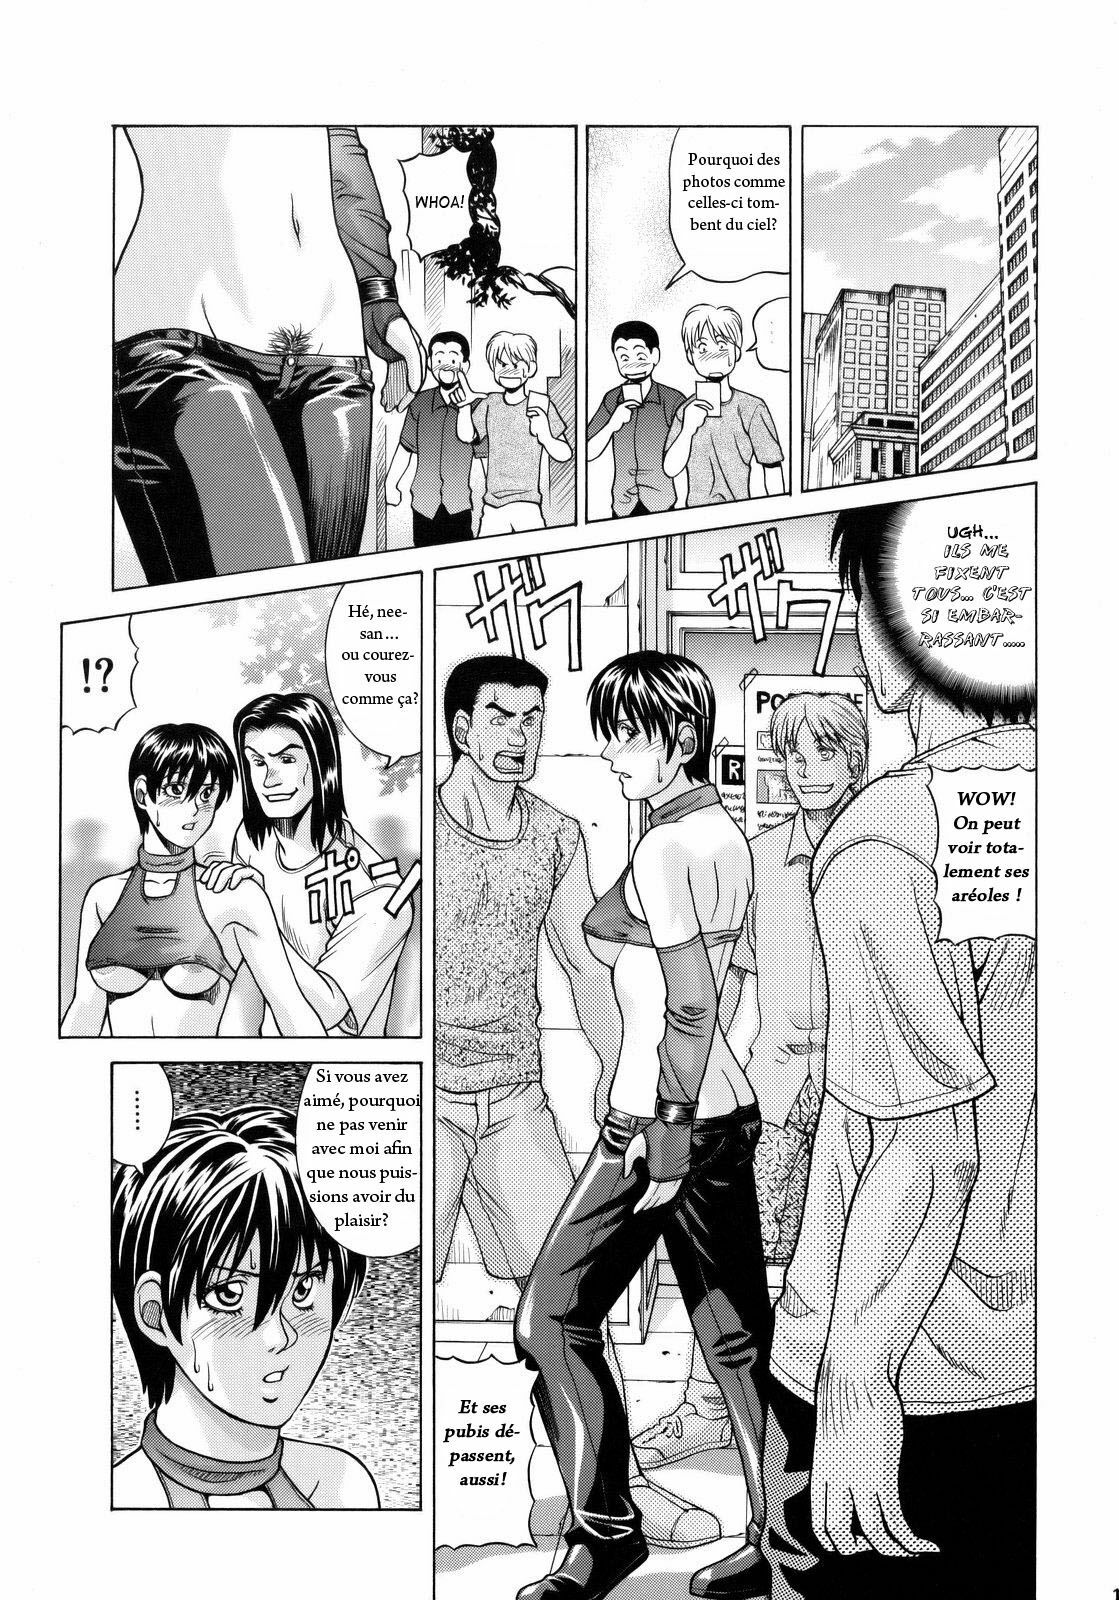 (C75) [Human High-Light Film (Jacky Knee-san)] Rebecca Chambers (Resident Evil) [French] page 12 full